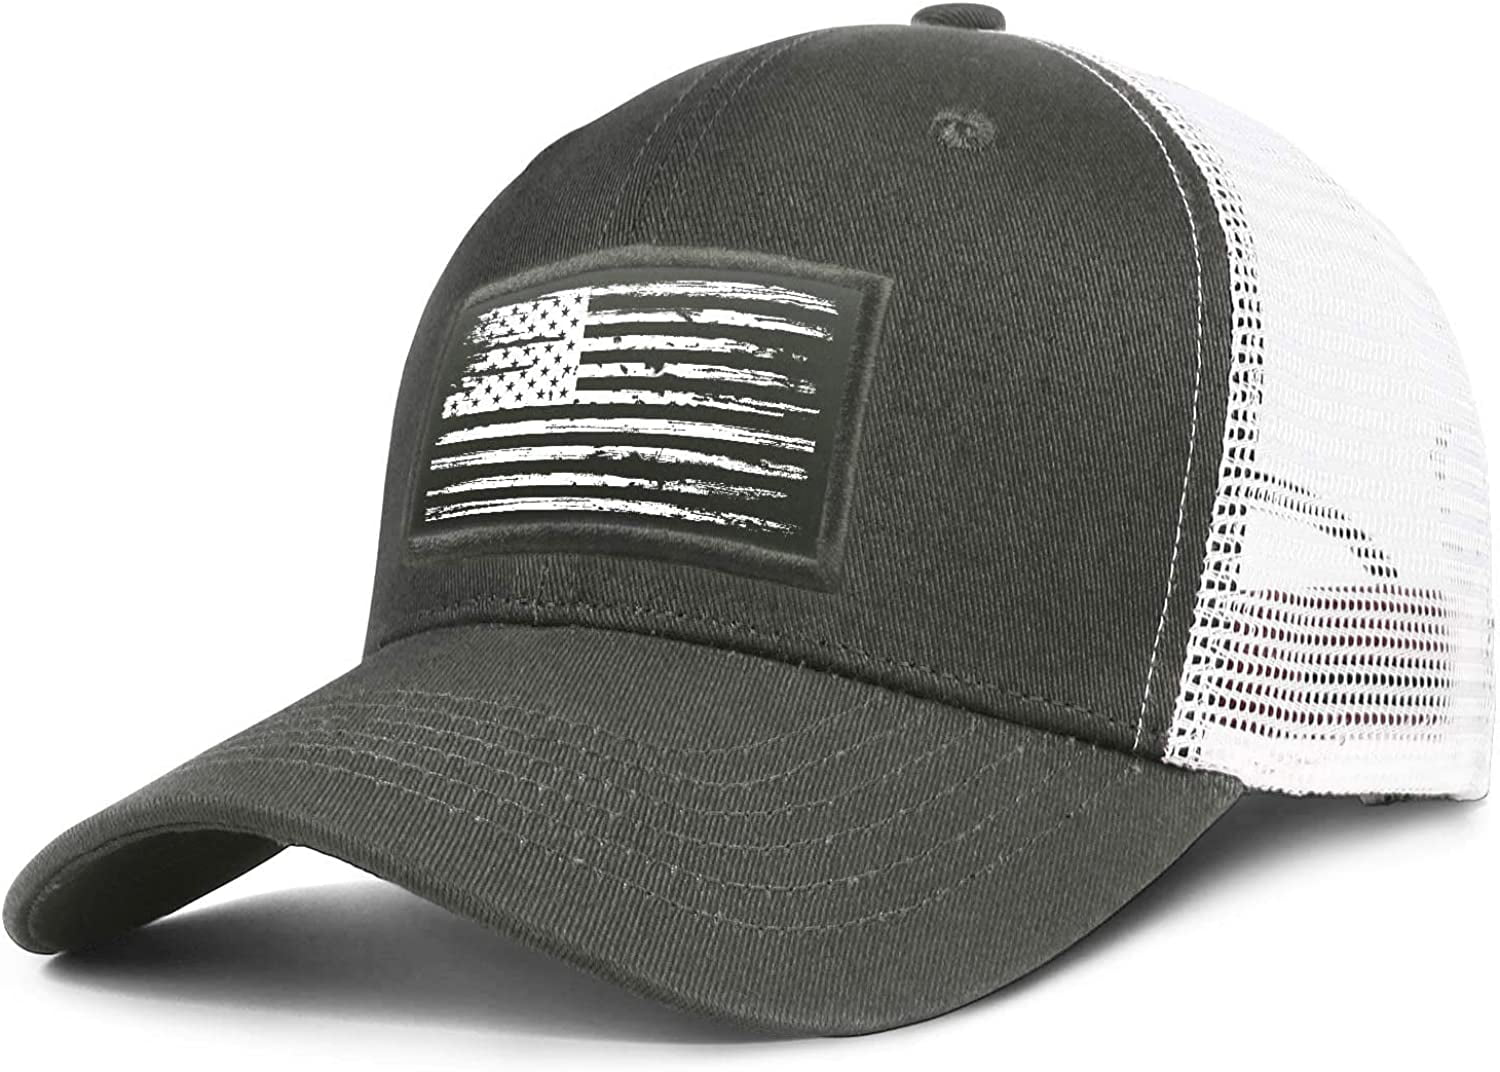 Made In USA Blank Trucker Hat Blacked Out – The American Hat Company